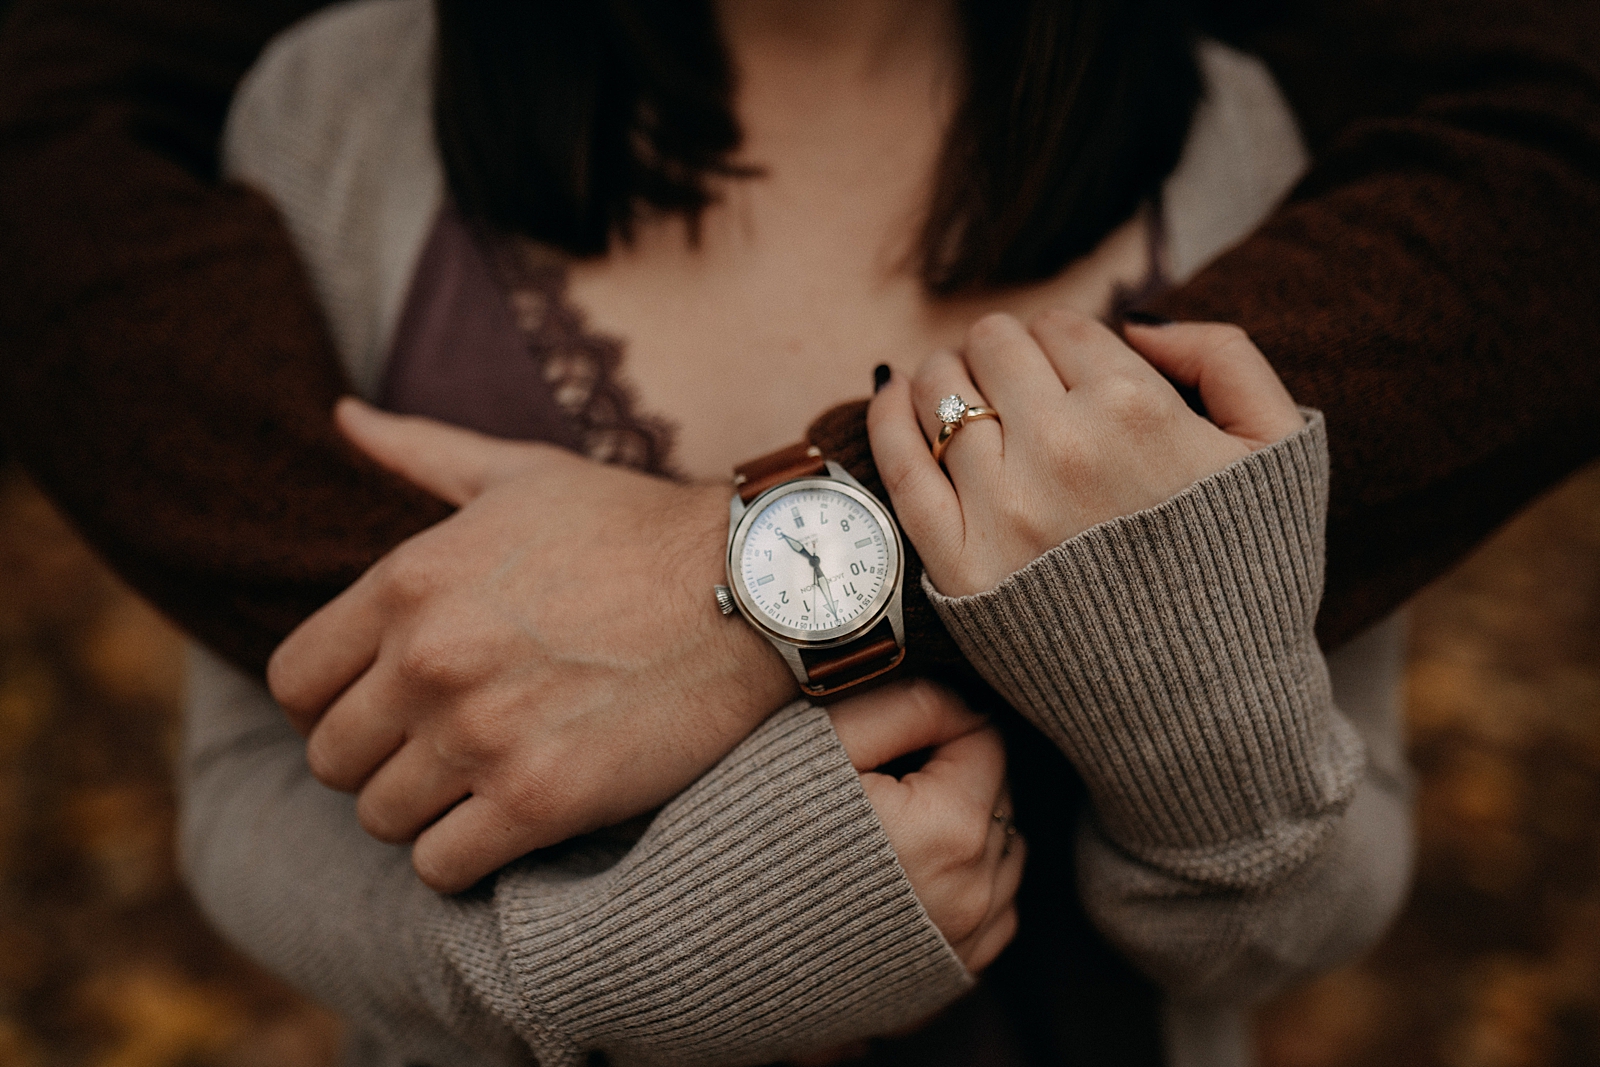 Closeup of man holding woman with watch on and engagement ring